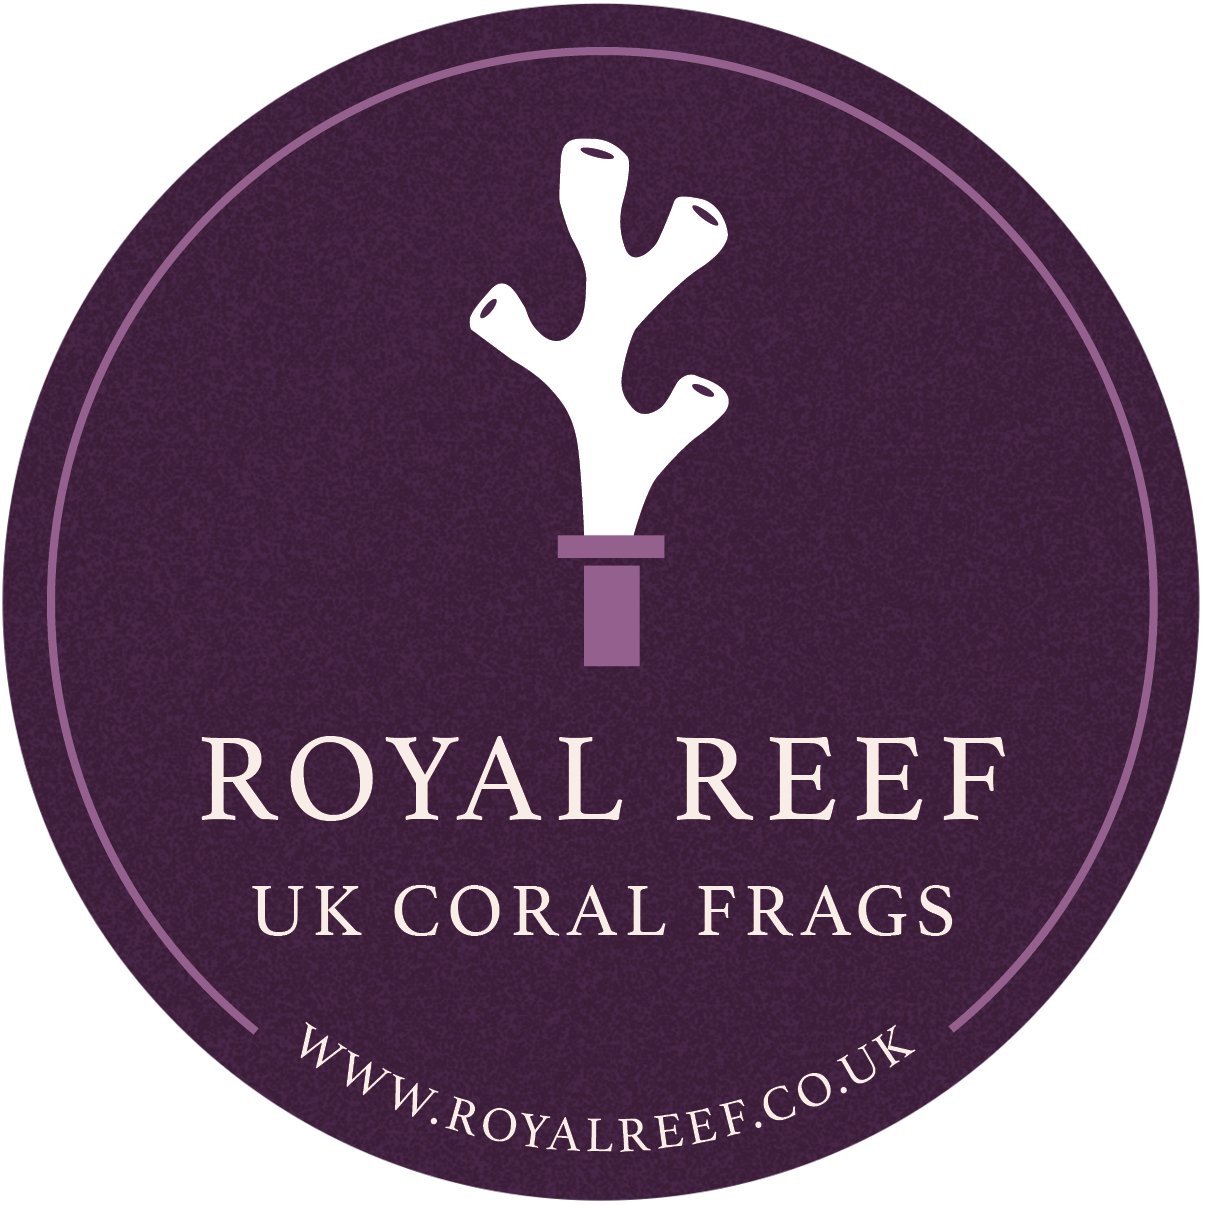 Coral Essentials Coral Power Fluoride - Royal Reef